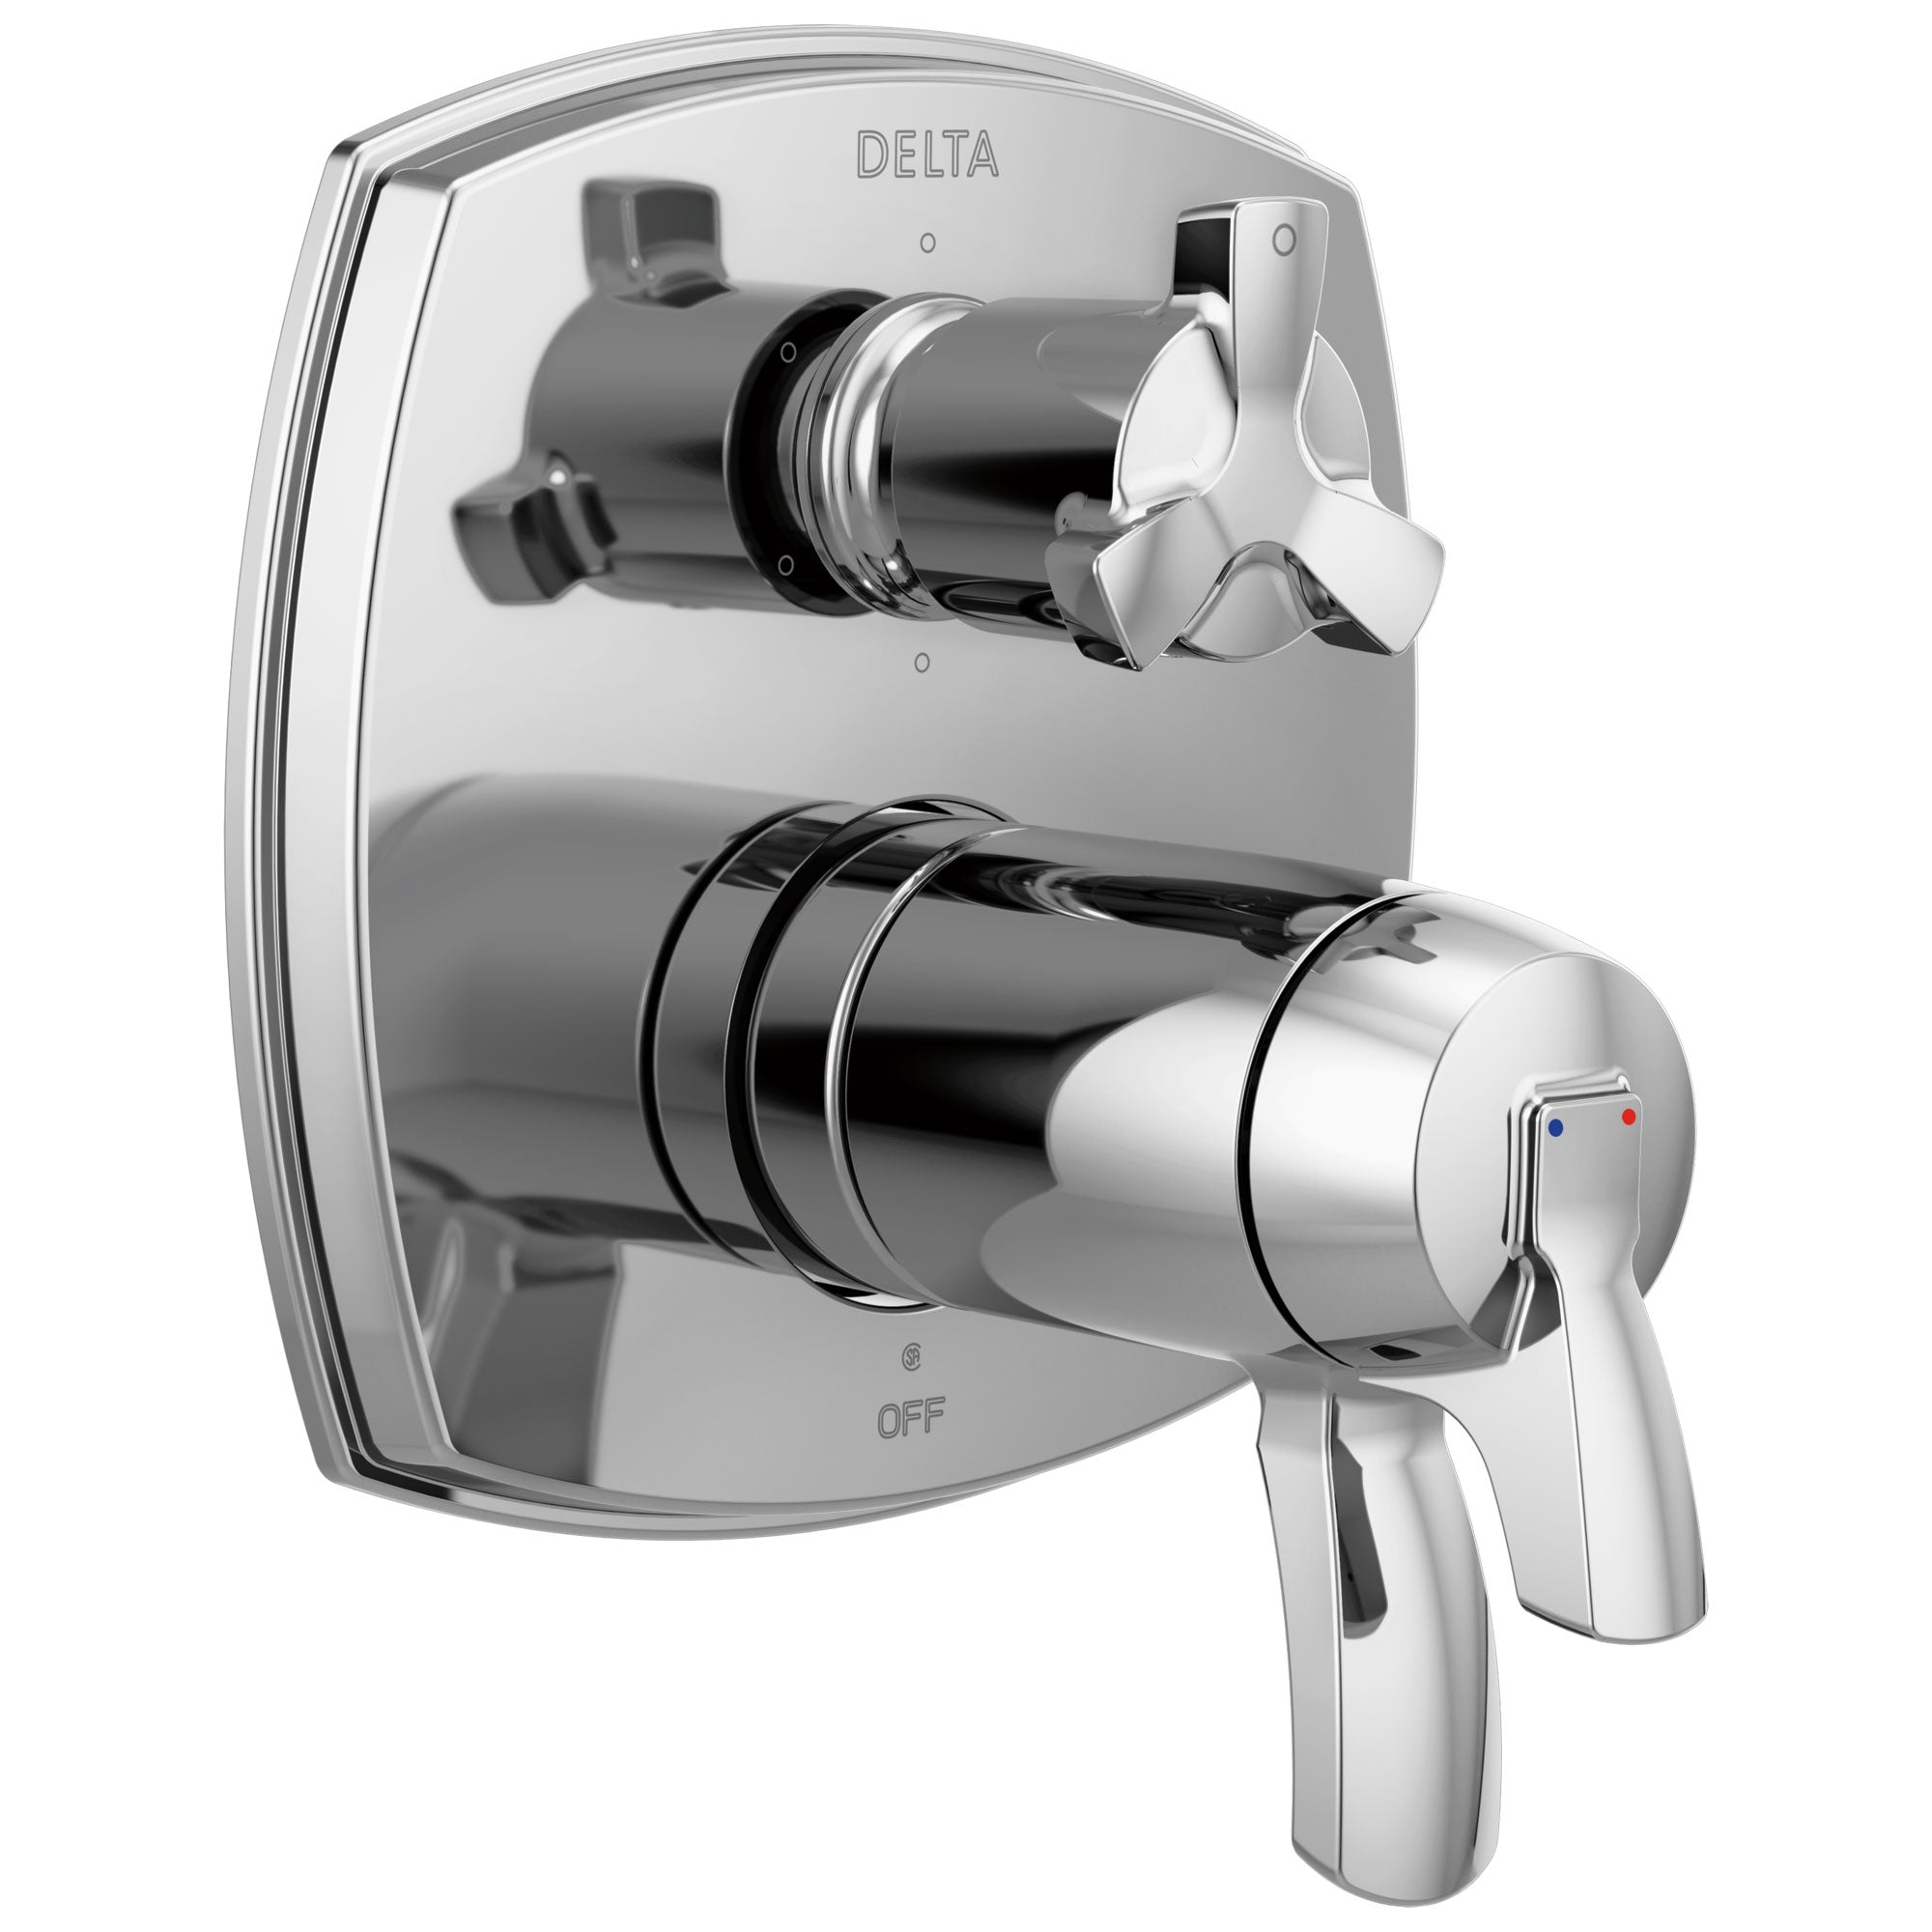 Delta Stryke Chrome Finish Thermostatic Shower System Control with 6 Setting Integrated Cross Handle Diverter Includes Valve & Handles D3665V